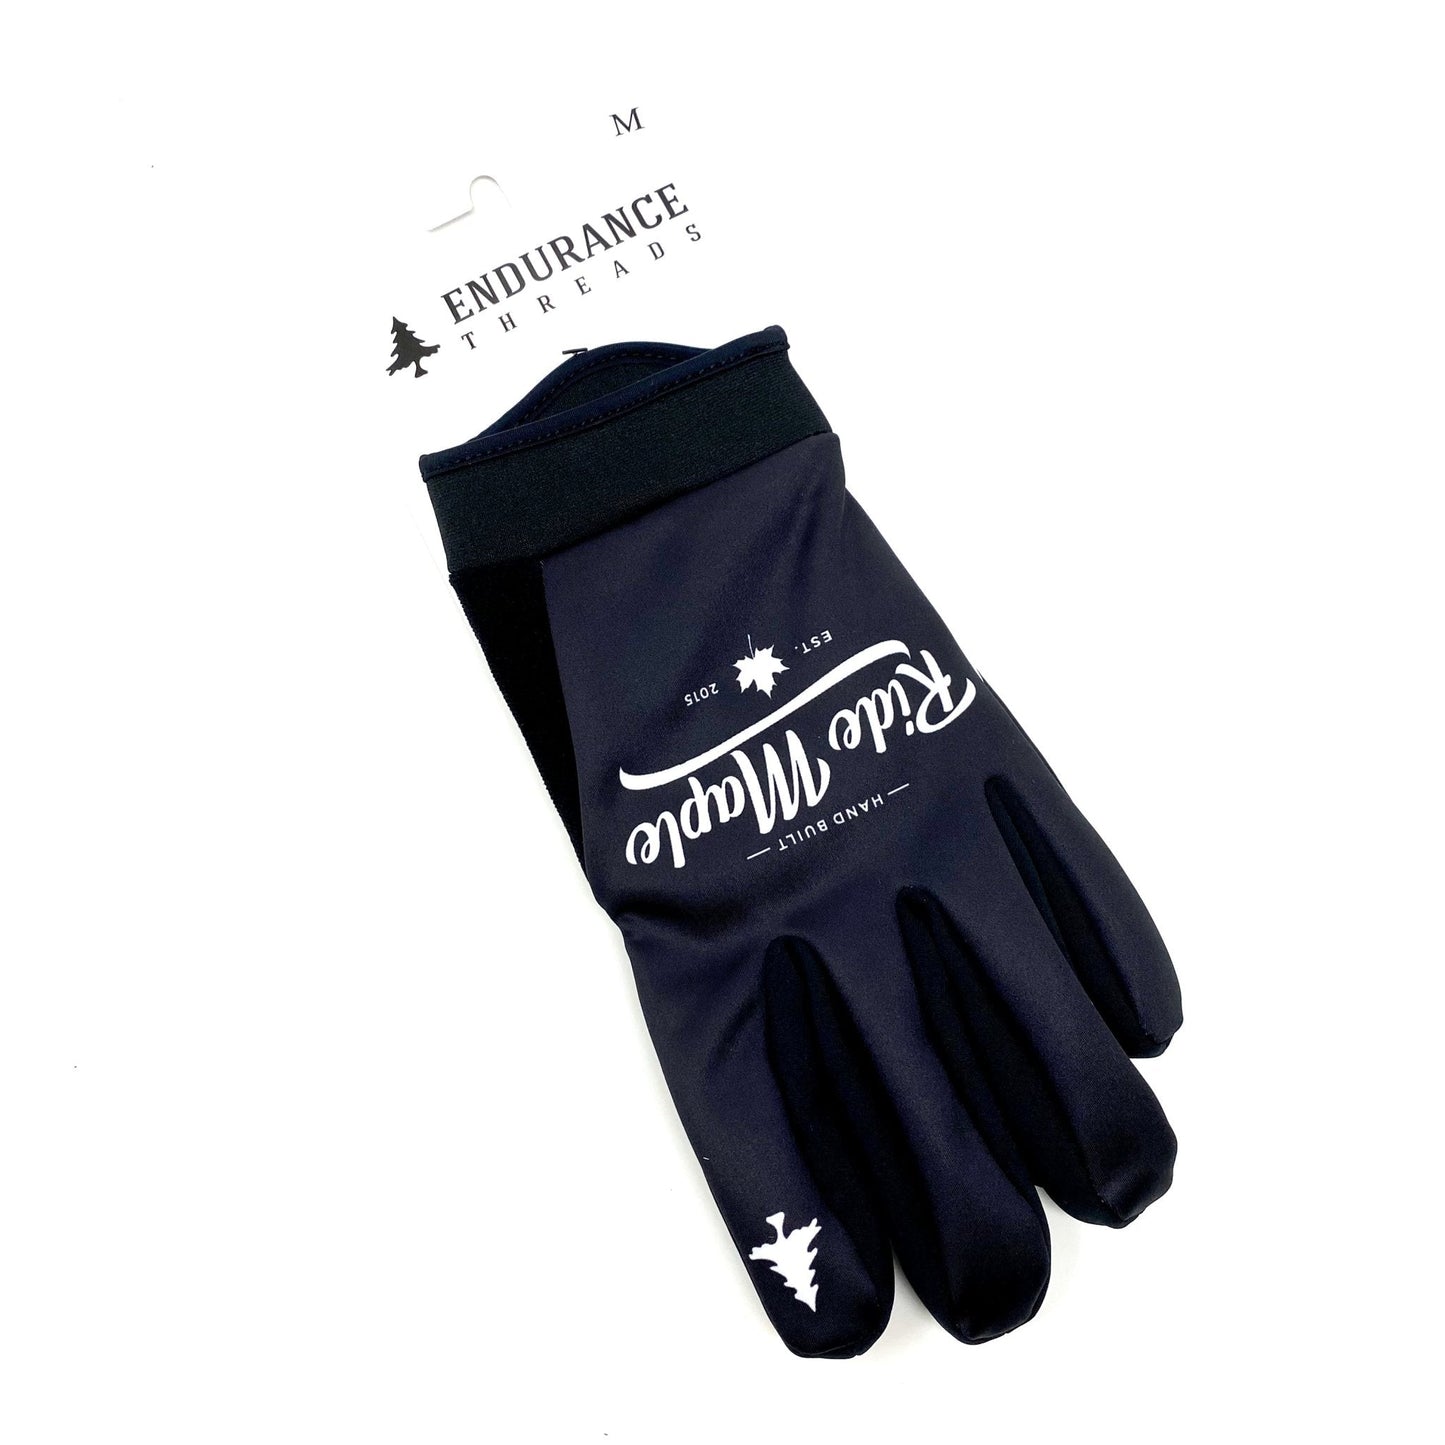 Classy Ride Maple C2 Cold Weather Gloves - Black (Final Sale) - Ride Maple